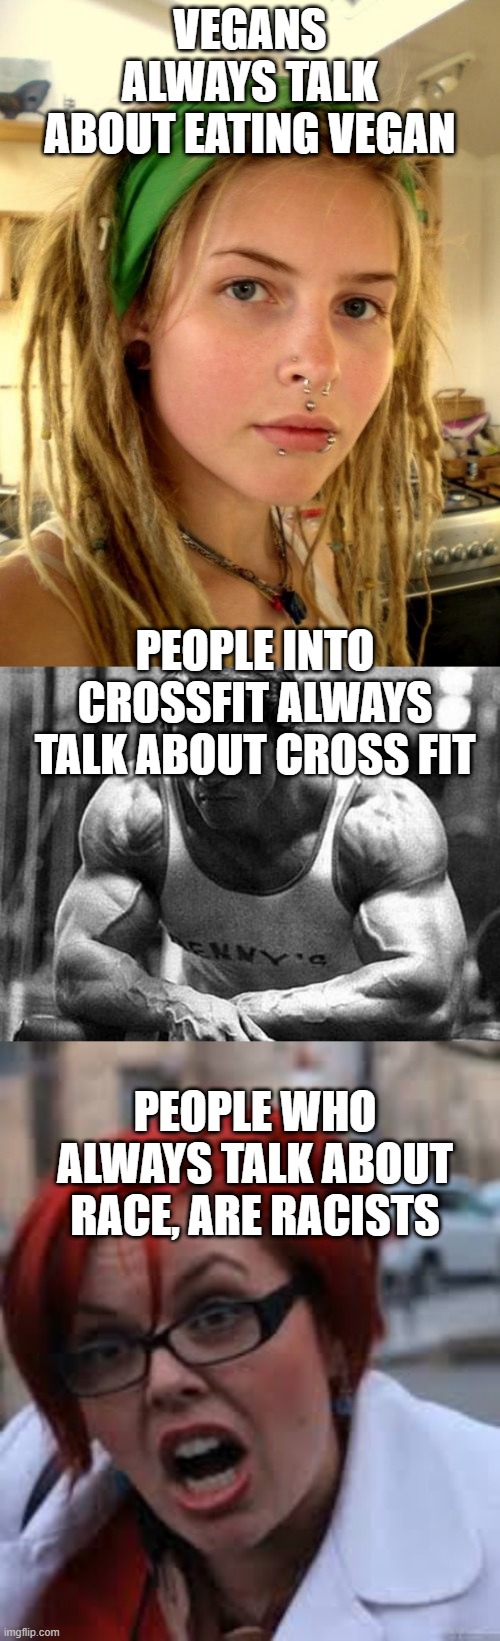  VEGANS ALWAYS TALK ABOUT EATING VEGAN; PEOPLE INTO CROSSFIT ALWAYS TALK ABOUT CROSS FIT; PEOPLE WHO ALWAYS TALK ABOUT RACE, ARE RACISTS | image tagged in arnold crossfit,vegan,sjw triggered | made w/ Imgflip meme maker